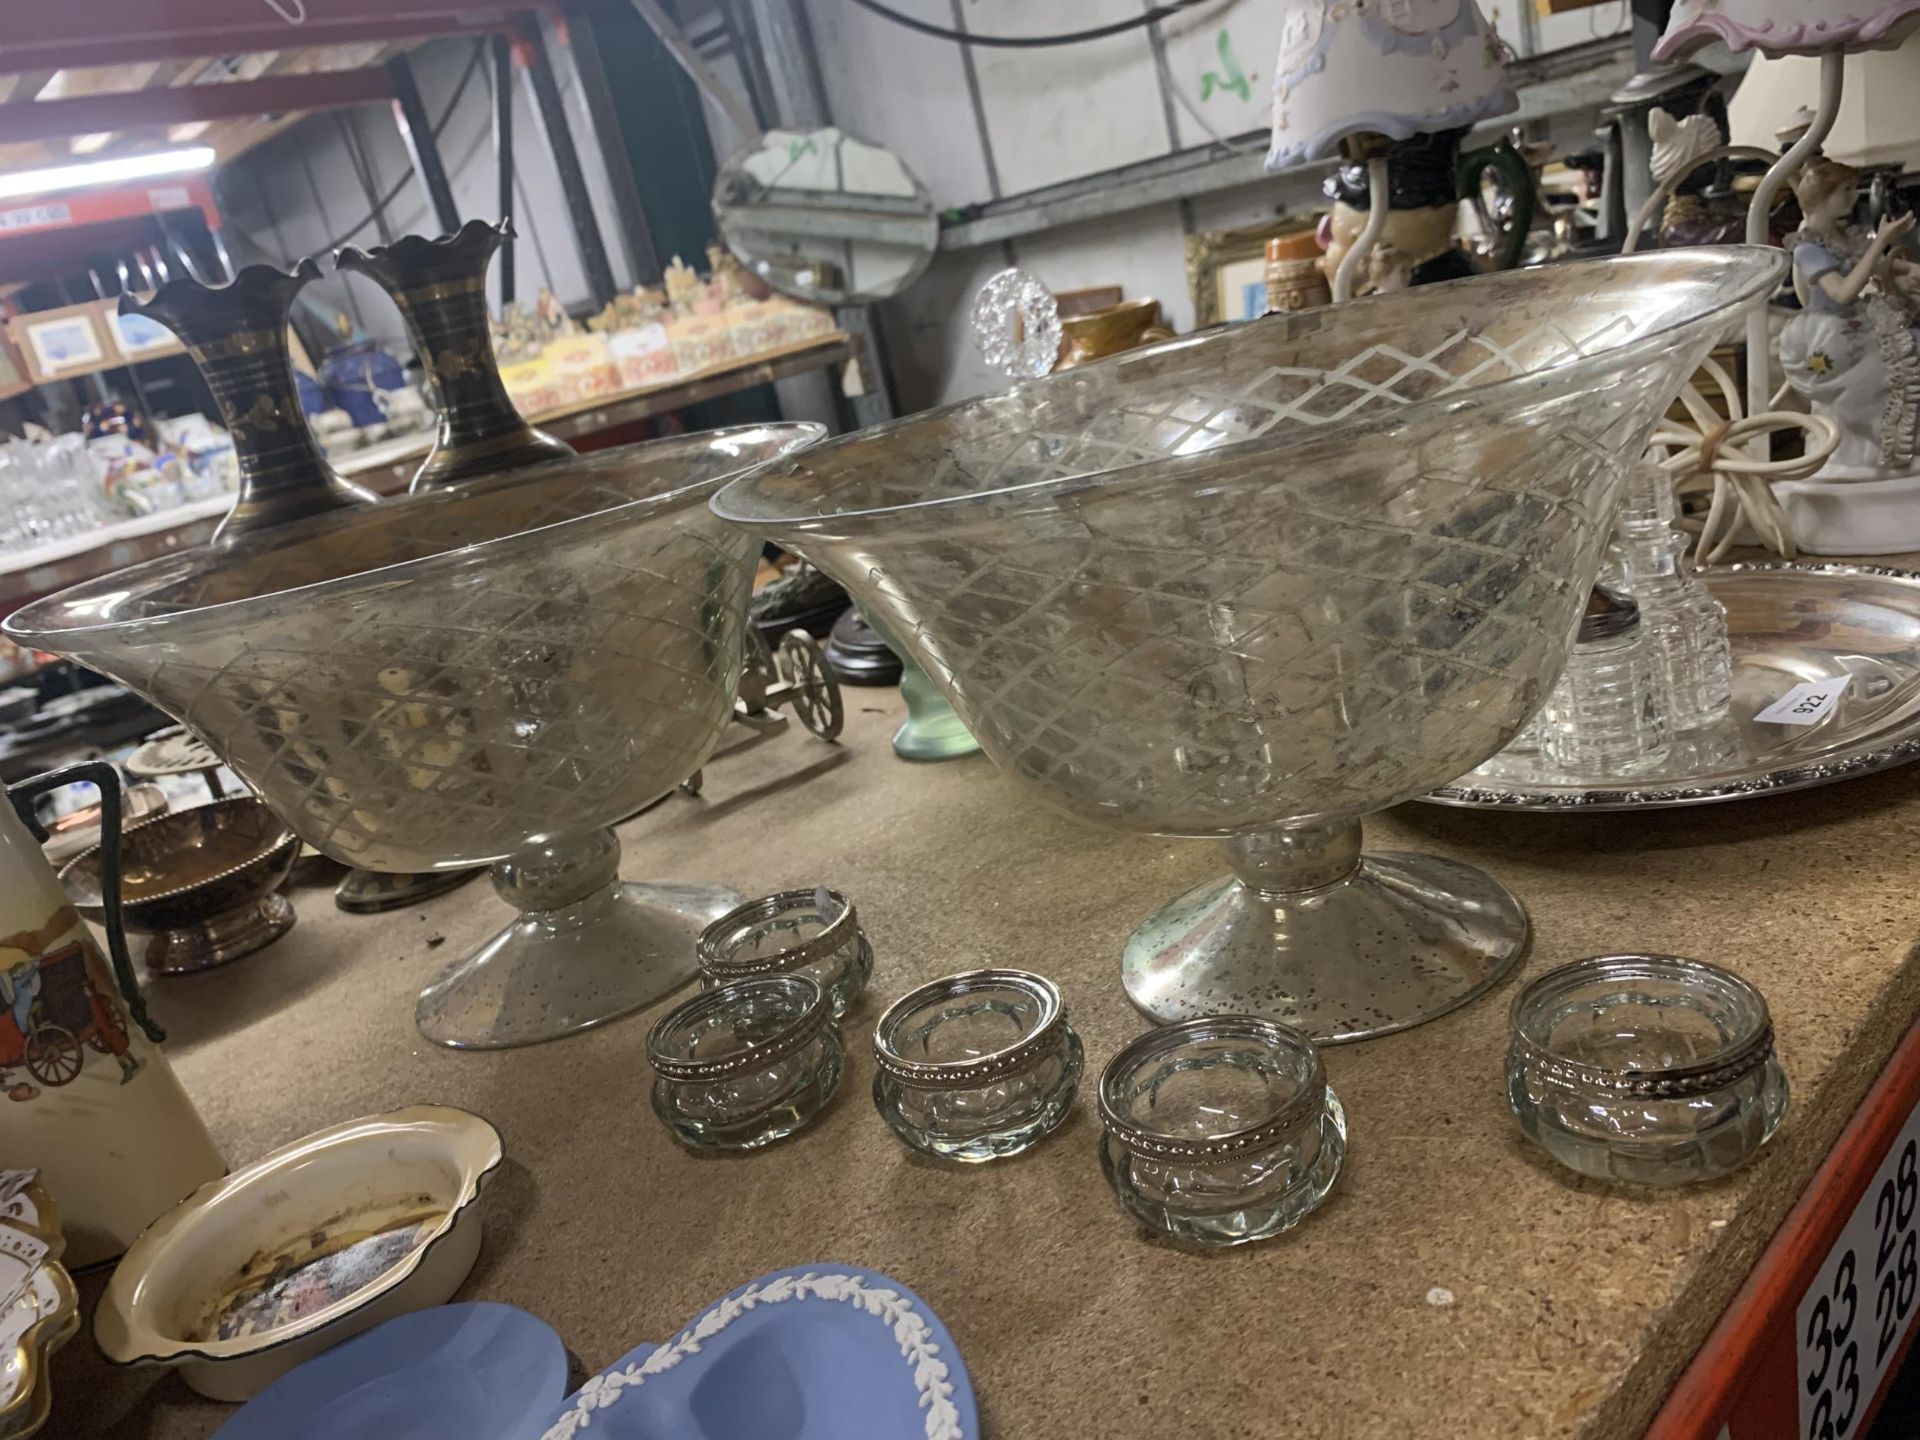 TWO LARGE GLASS FOOTED BOWLS WITH SILVER COLOURED BASE AND FIVE GLASS TEALIGHT HOLDERS